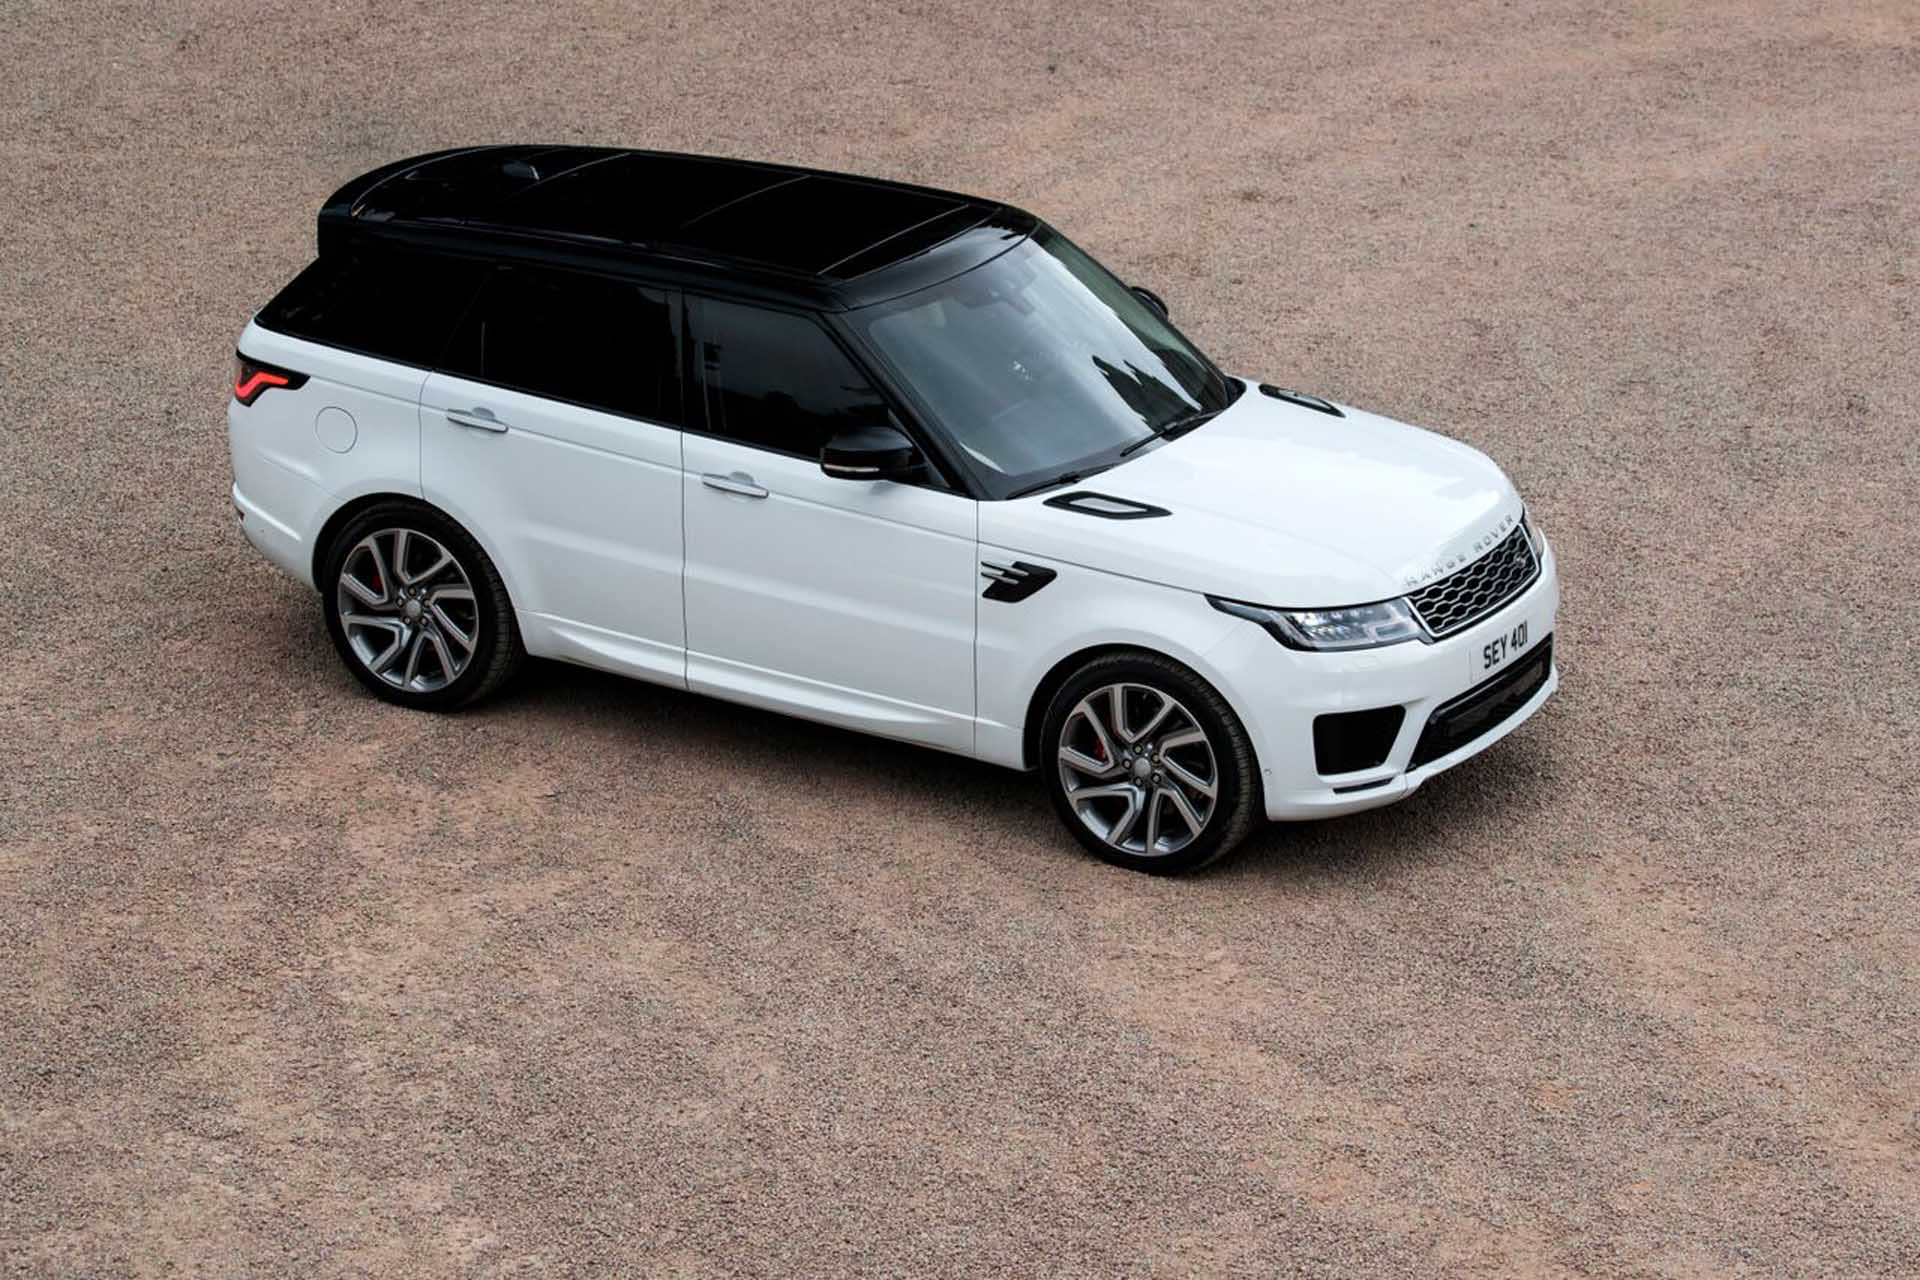 Range Rover Car Types  . Range Rover Is Also Being Developed By Land Rover As Its.